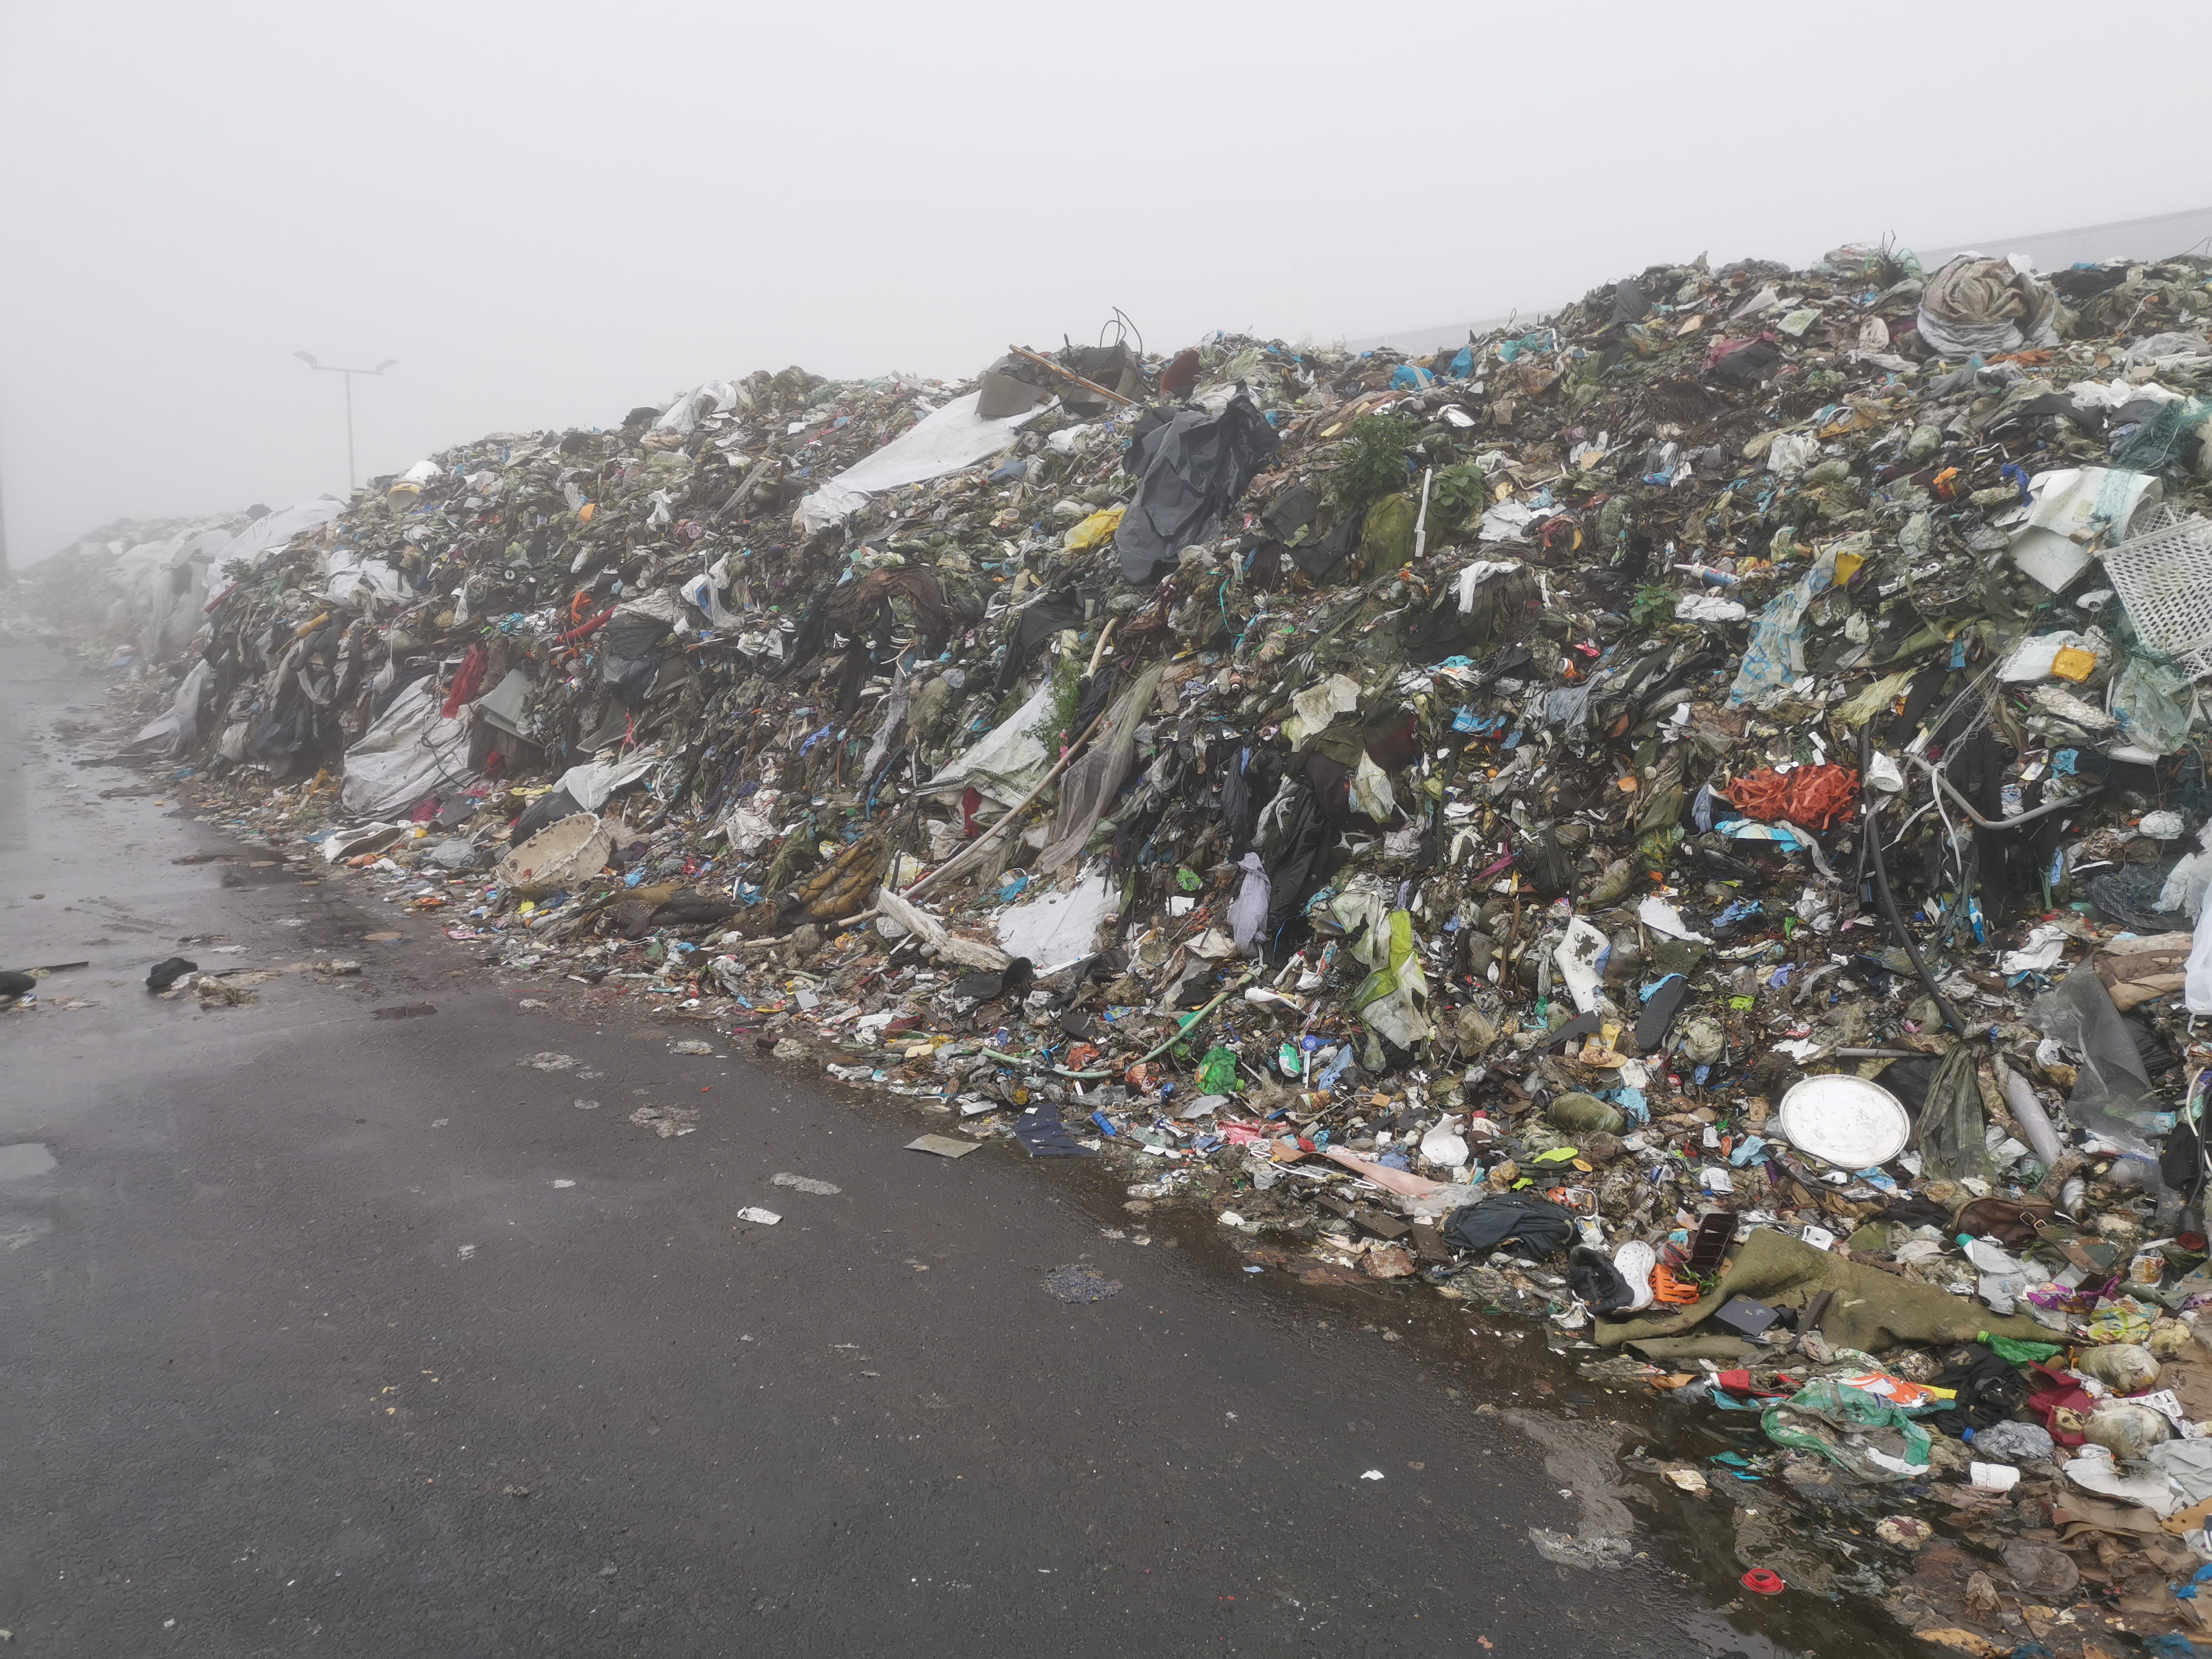 A colorful heap of landfill waste on a concrete flooring in foggy surroundings.